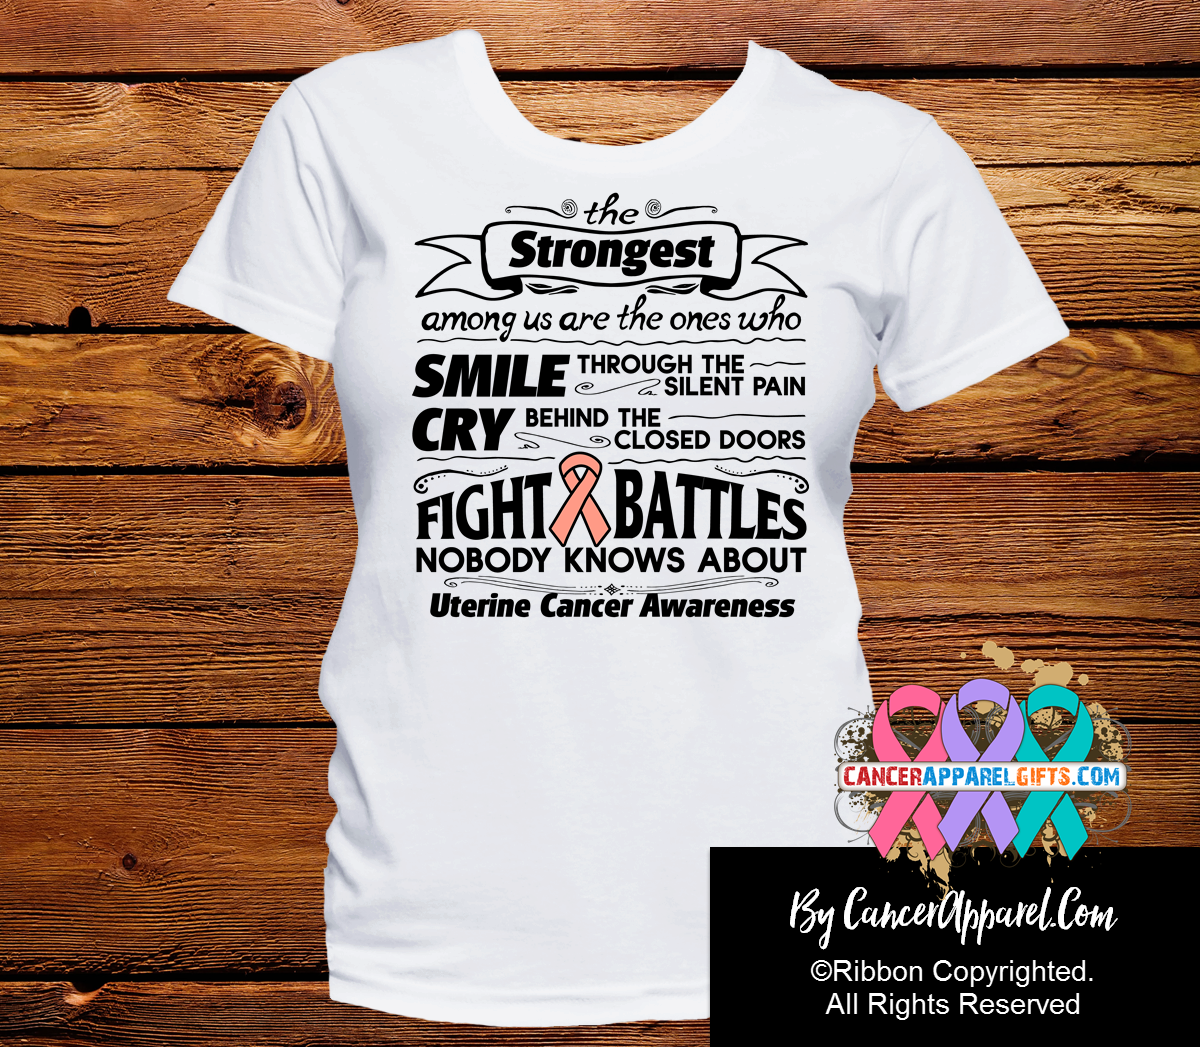 Uterine Cancer The Strongest Among Us Shirts - Cancer Apparel and Gifts